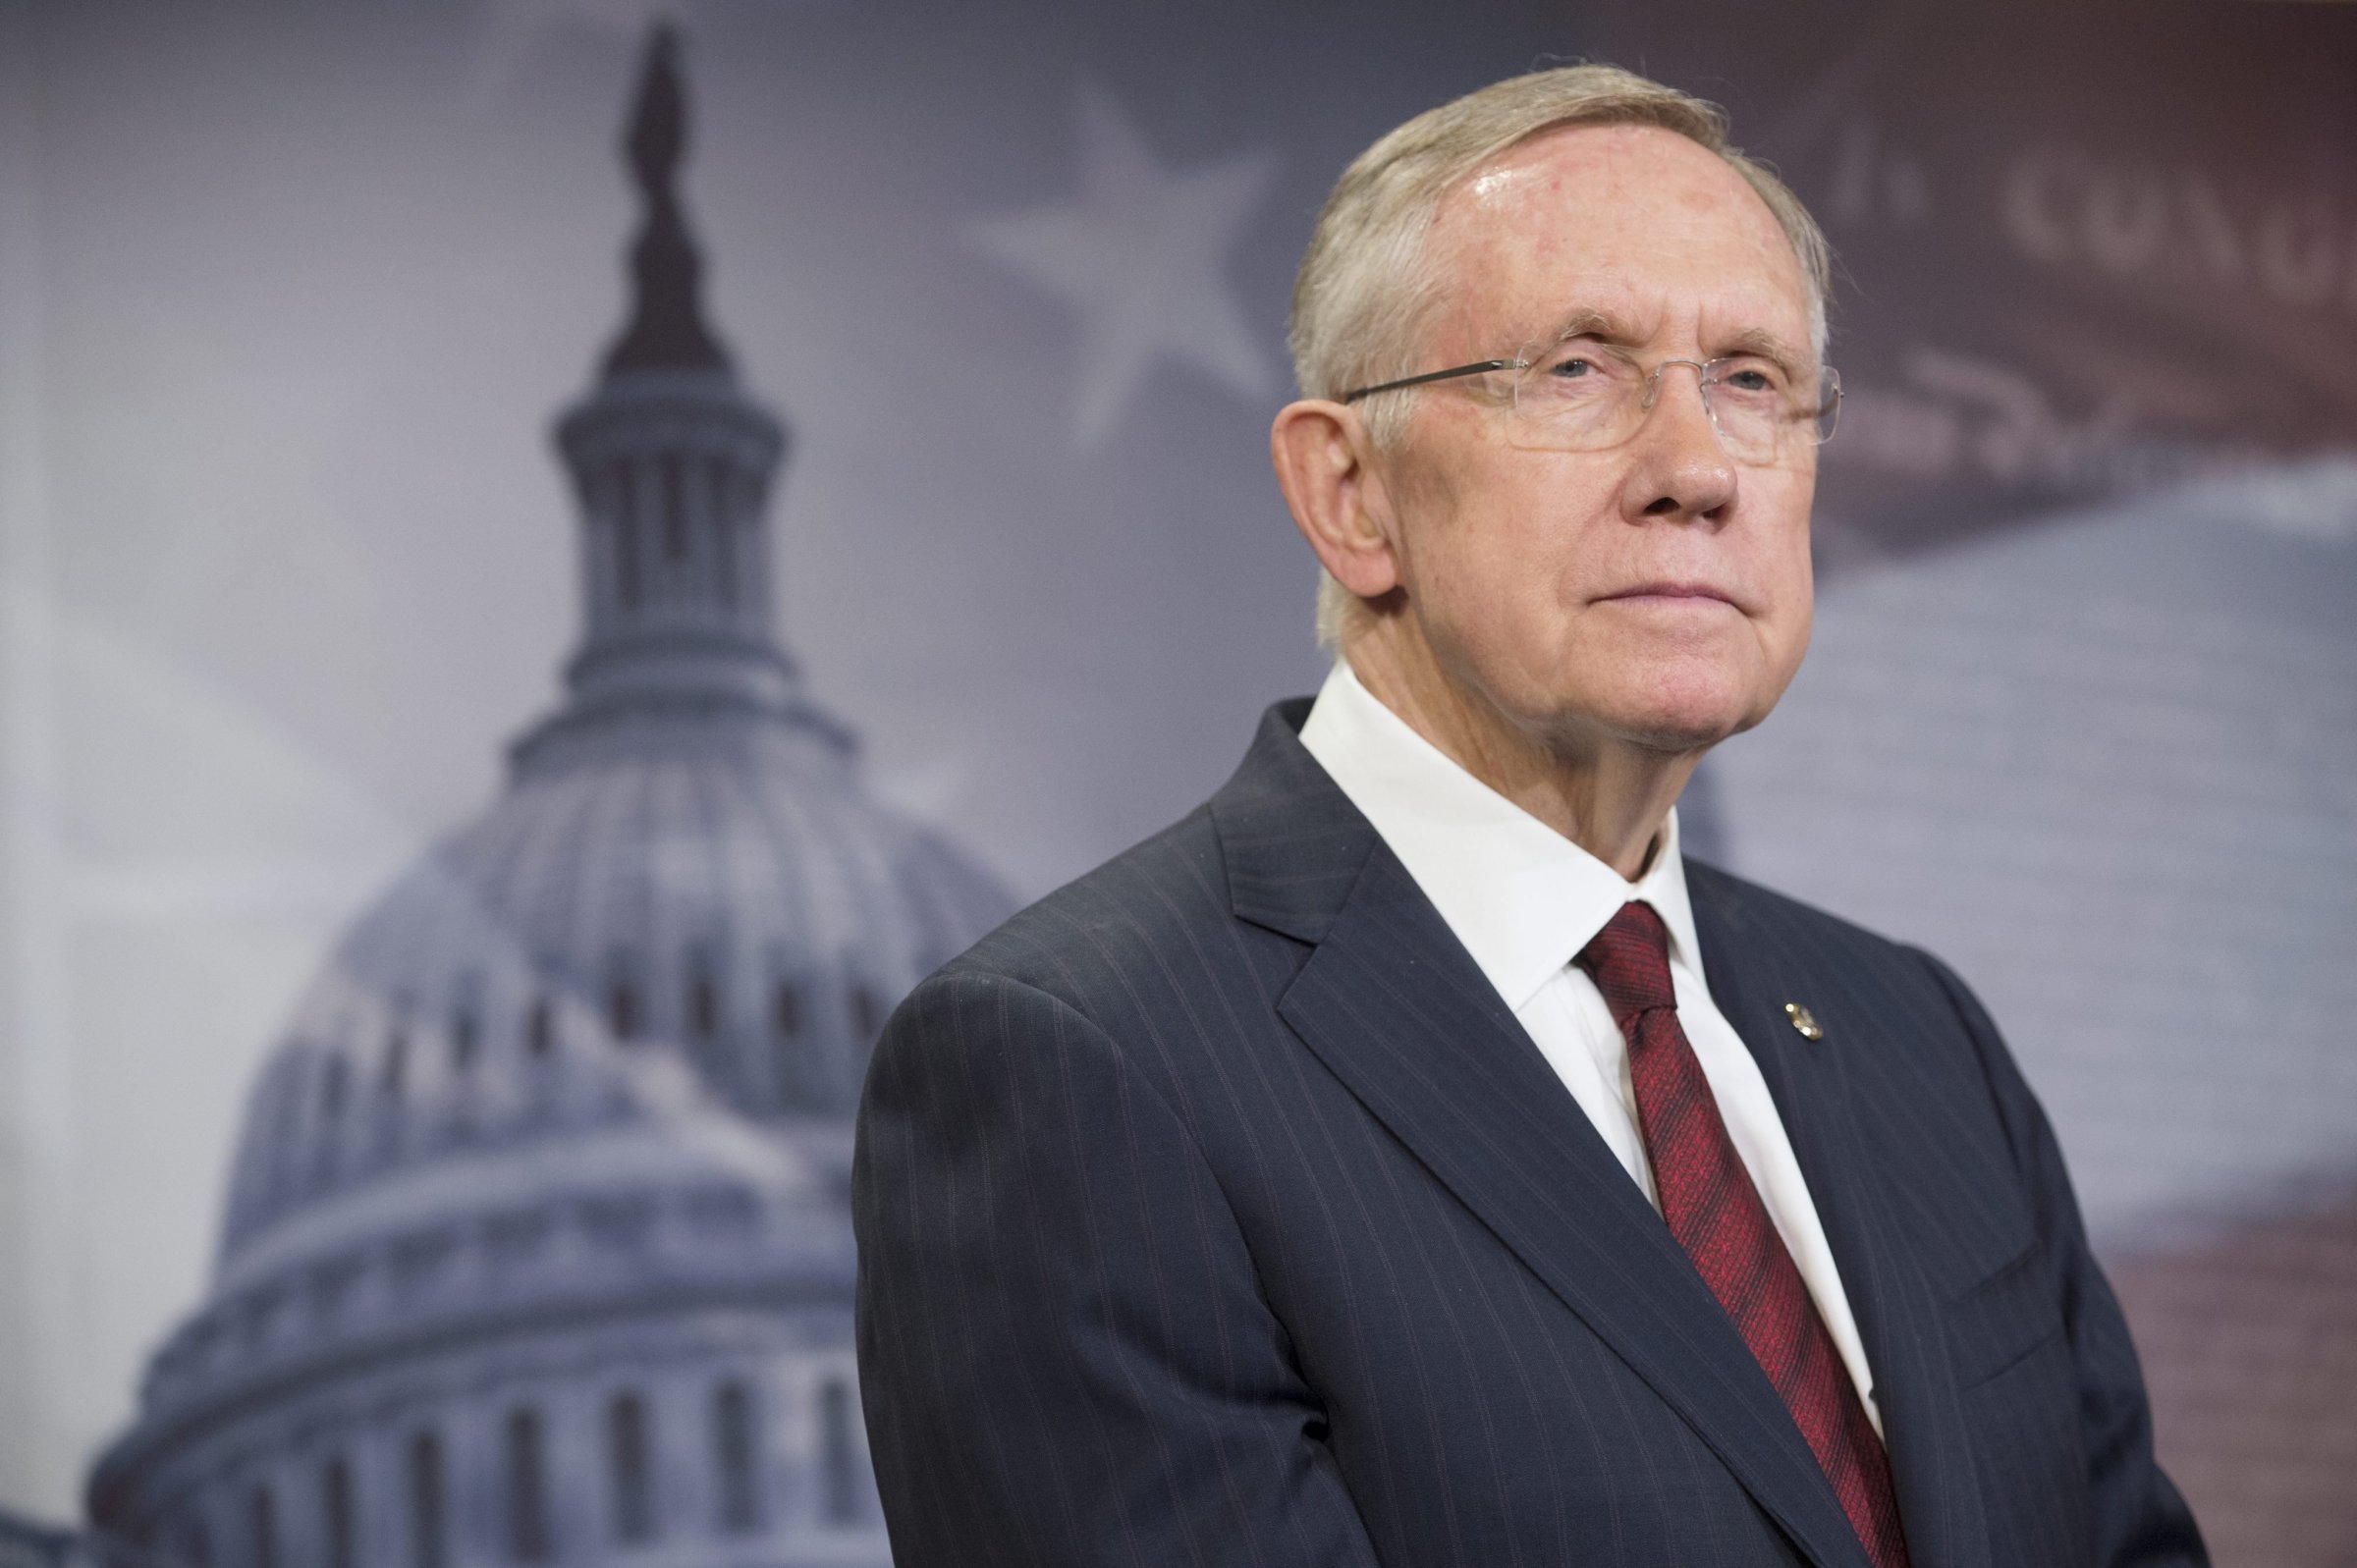 Senate Majority Leader Democrat Harry Reid attends a news conference on Capitol Hill in Washington on Sept. 18, 2014.